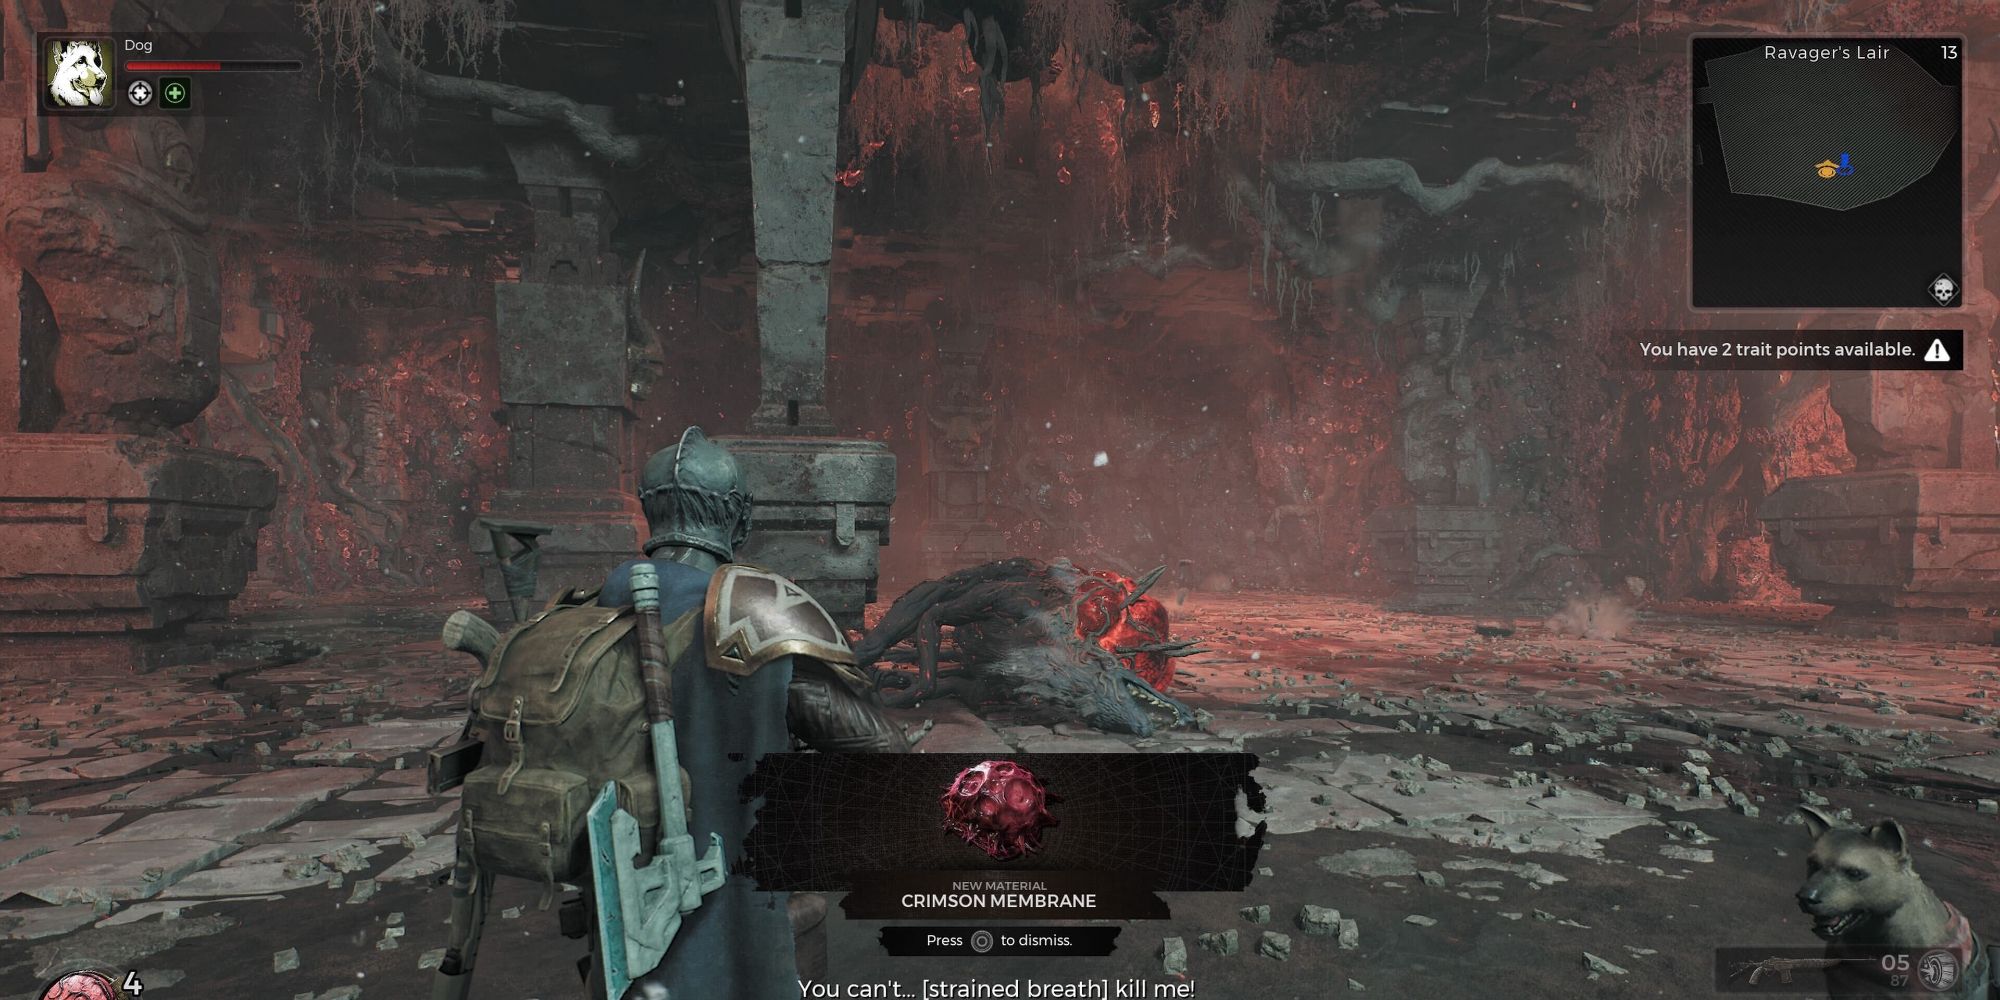 A player receiving the Crimson Membrane item for completing an Alternate Kill in Remnant 2